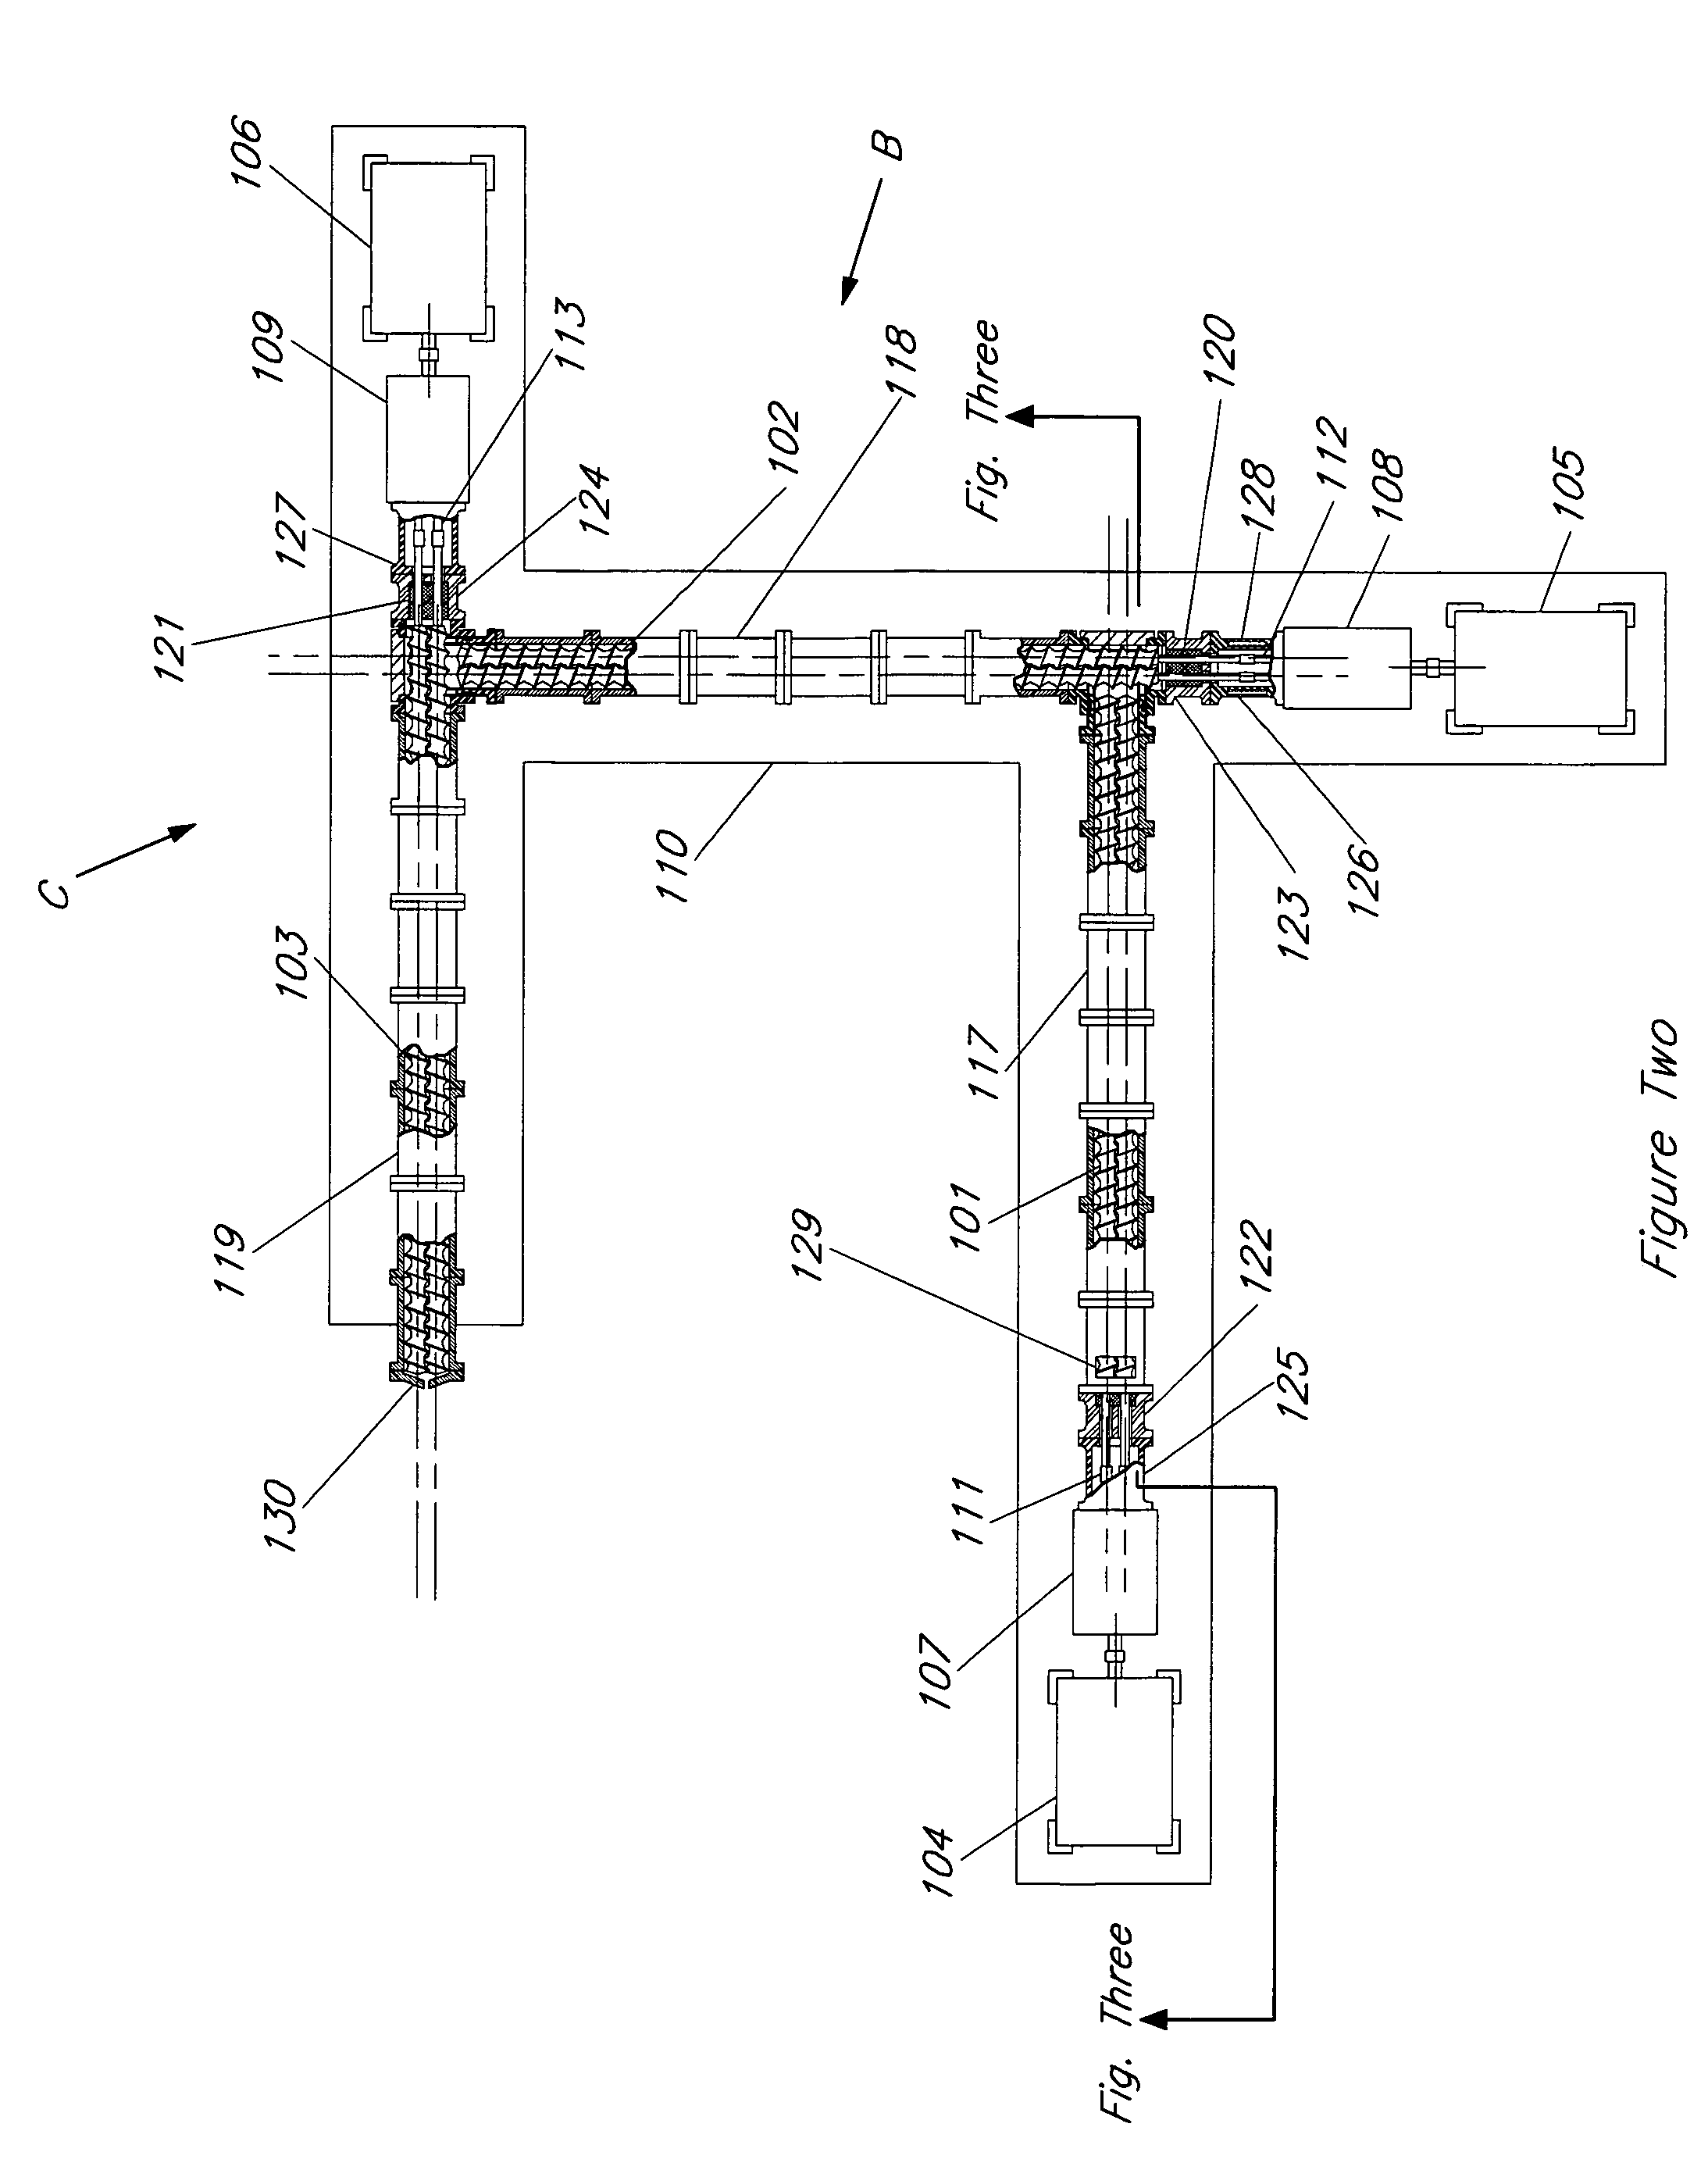 Multiple extruder assembly and process for continuous reactive extrusion